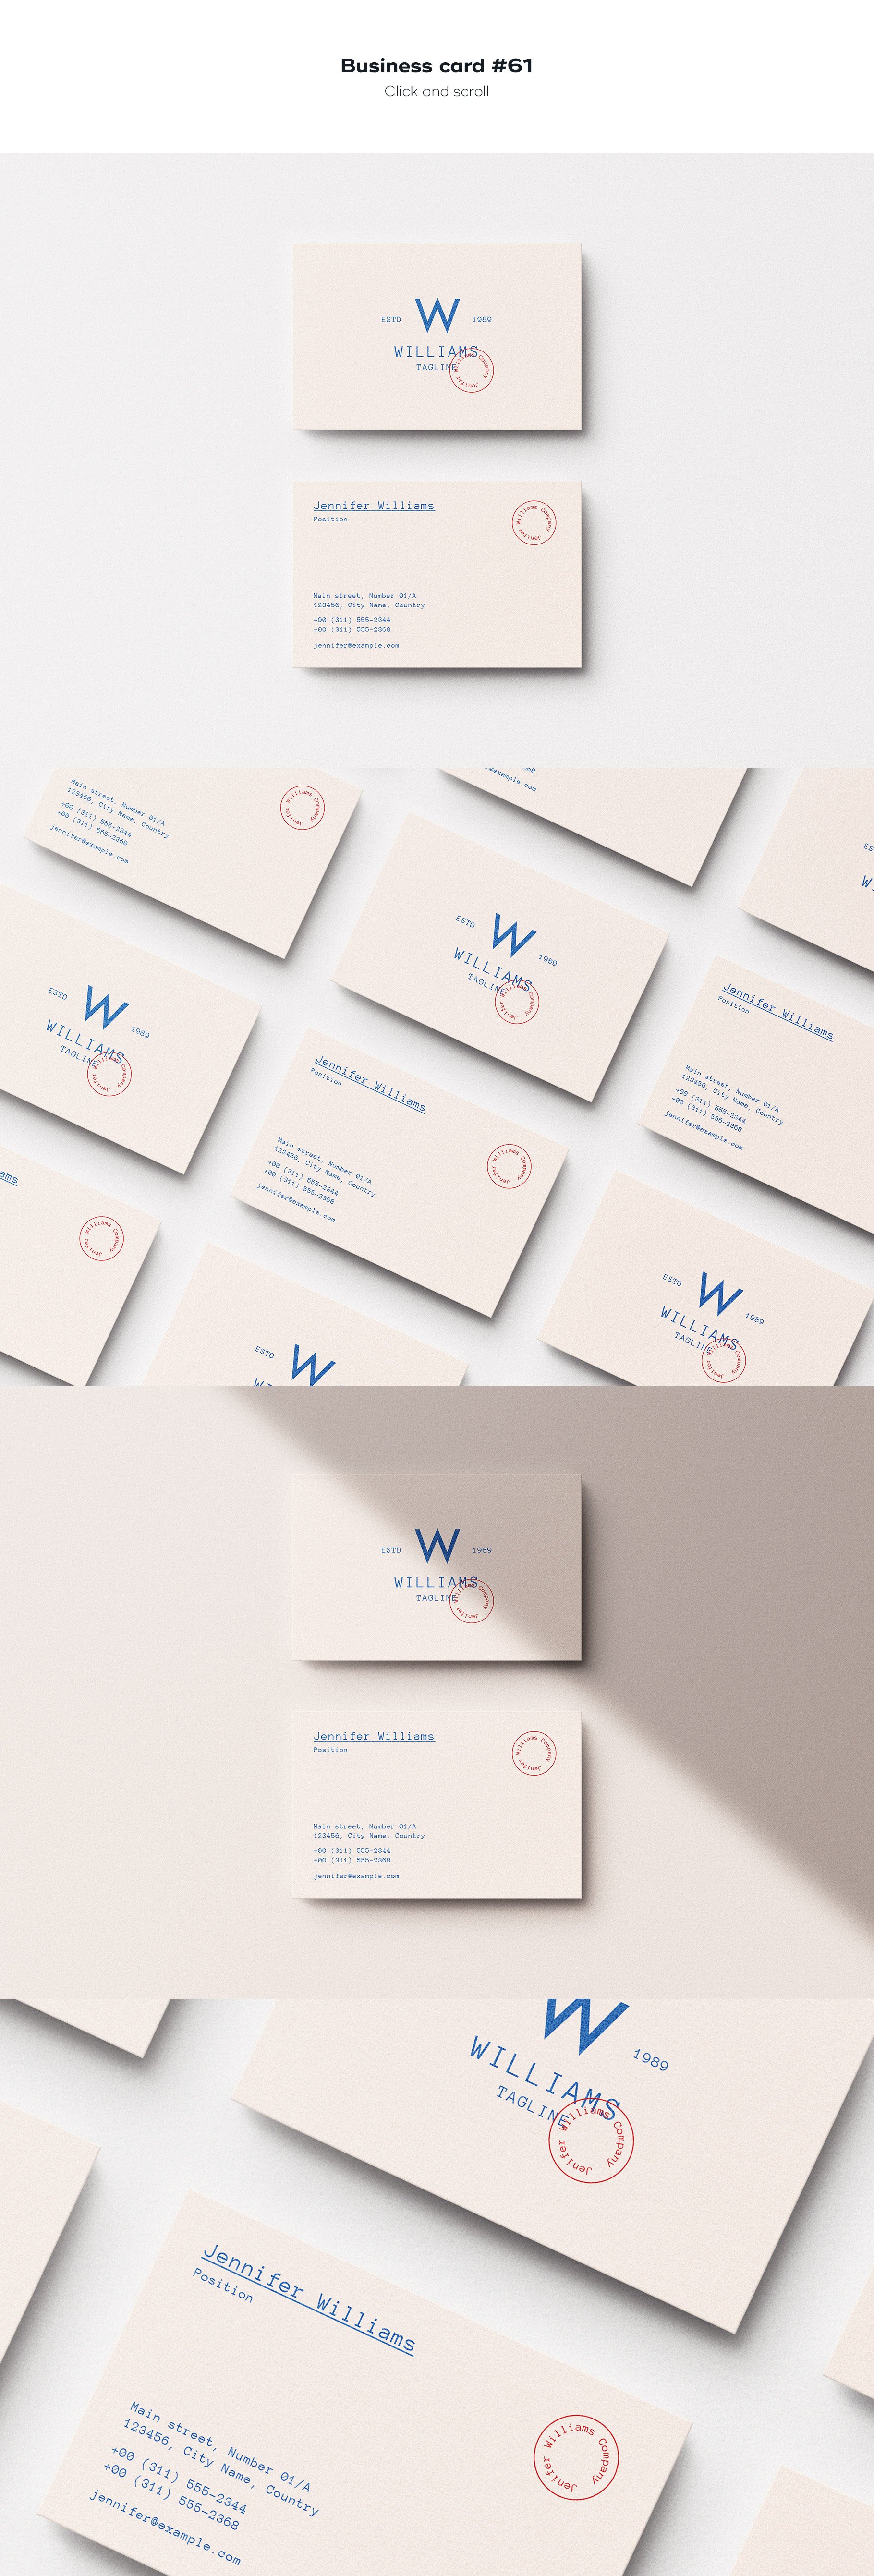 business card 61 340